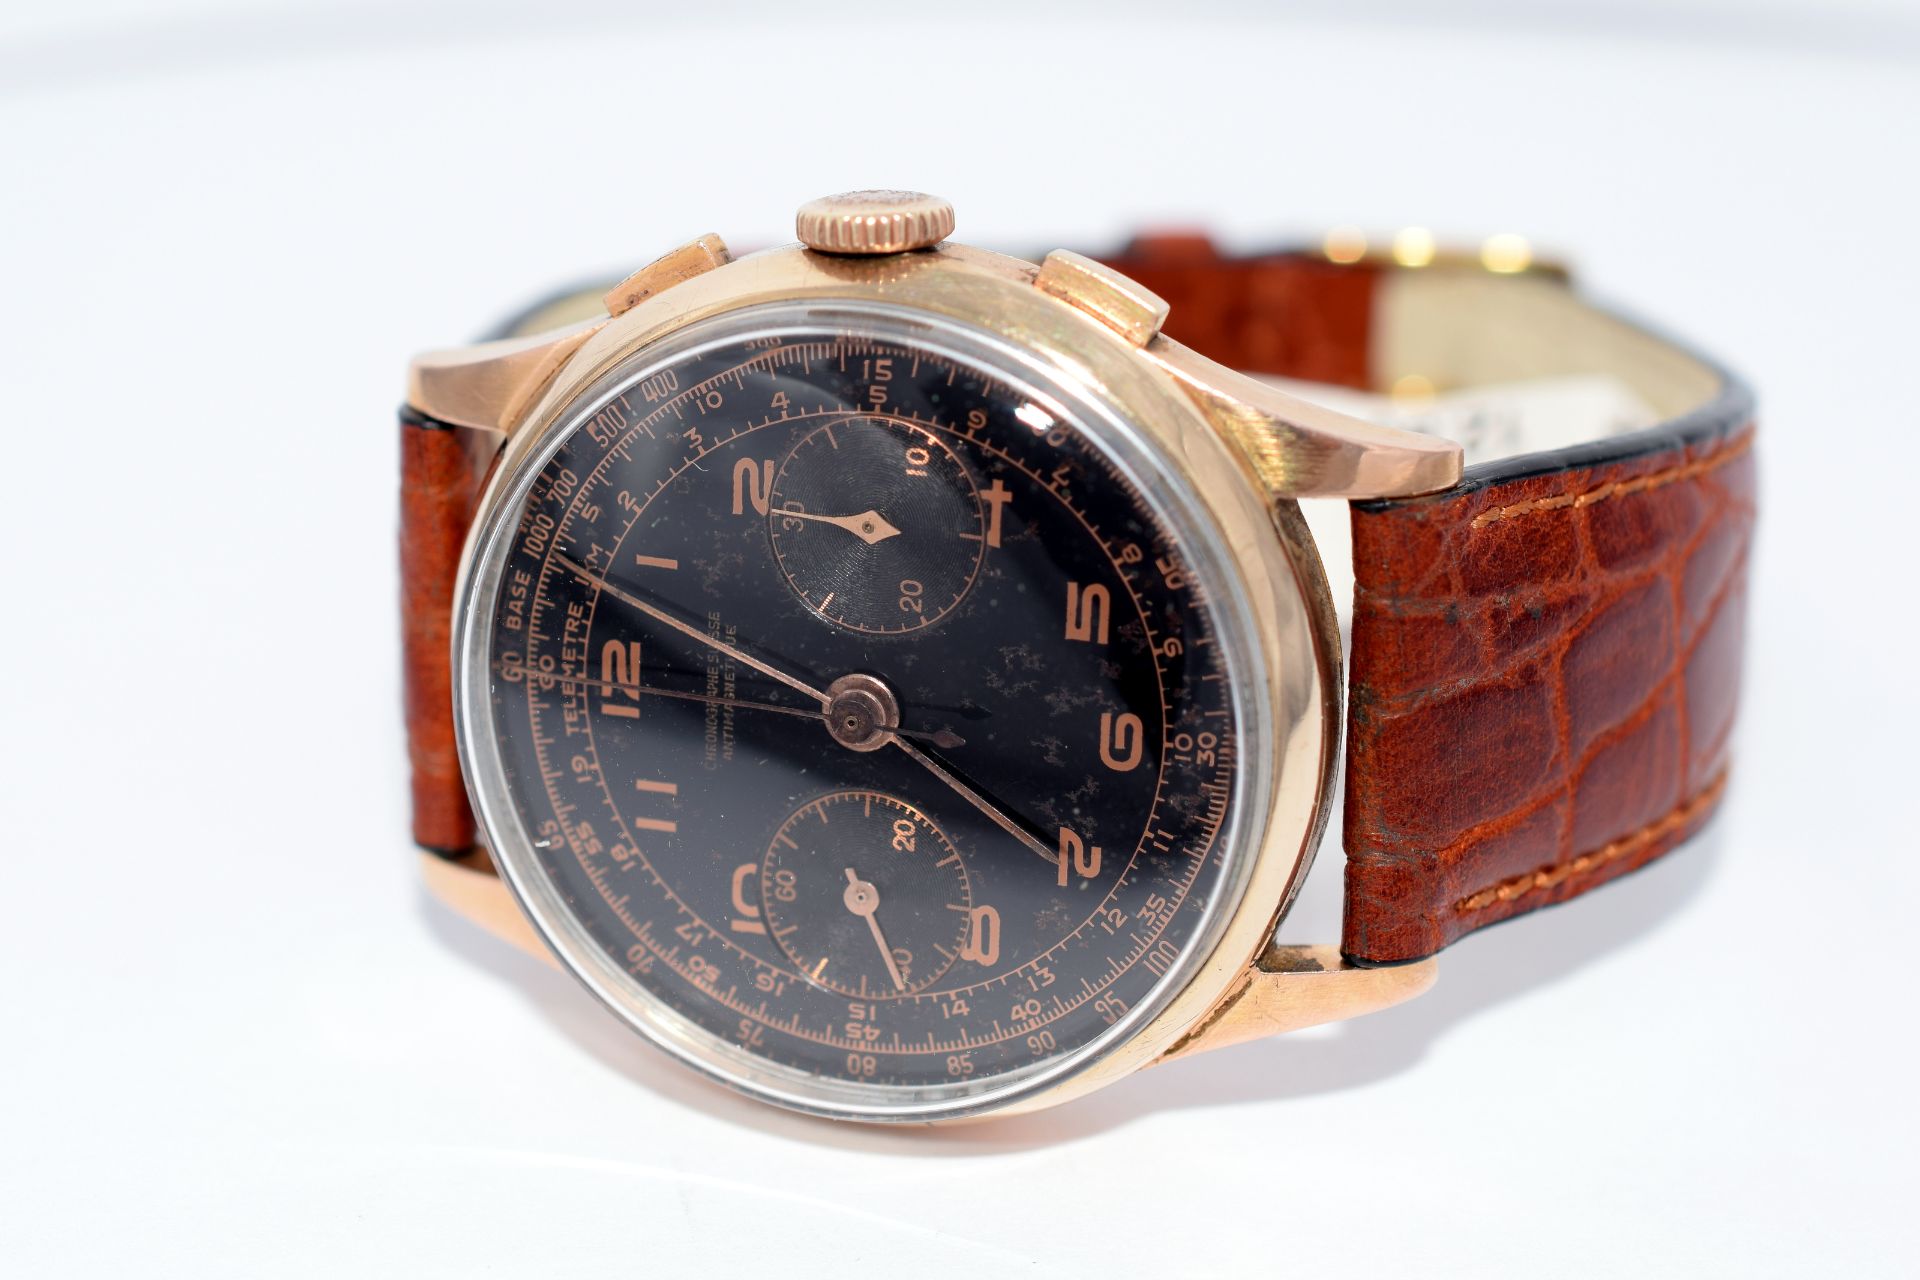 Chronographe Suisse 18ct Gold Vintage Chronograph With Black Dial - Image 4 of 11